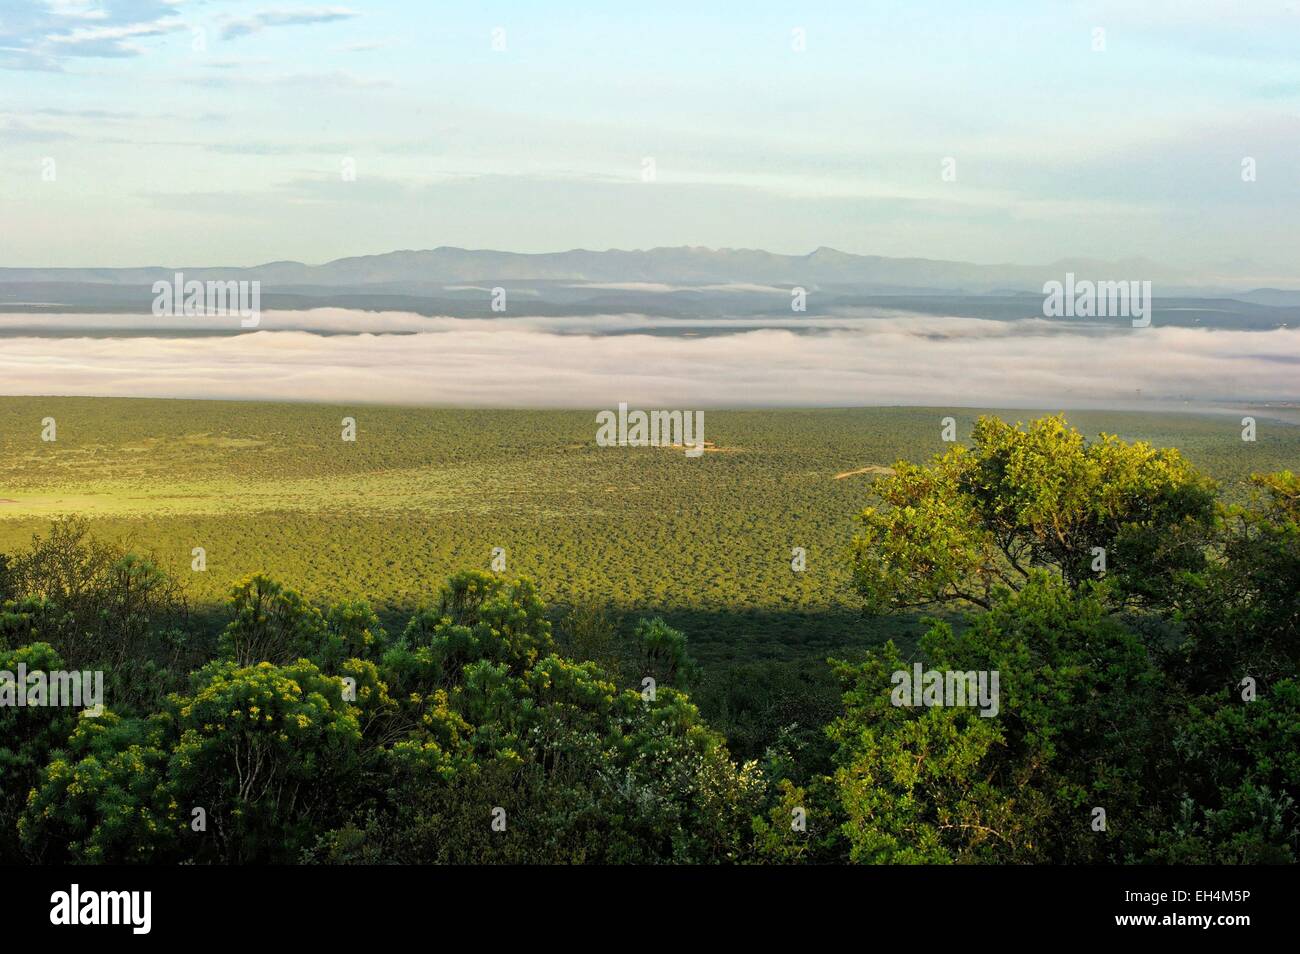 South Africa, Eastern Cape, Addo Elephant National Park Stock Photo